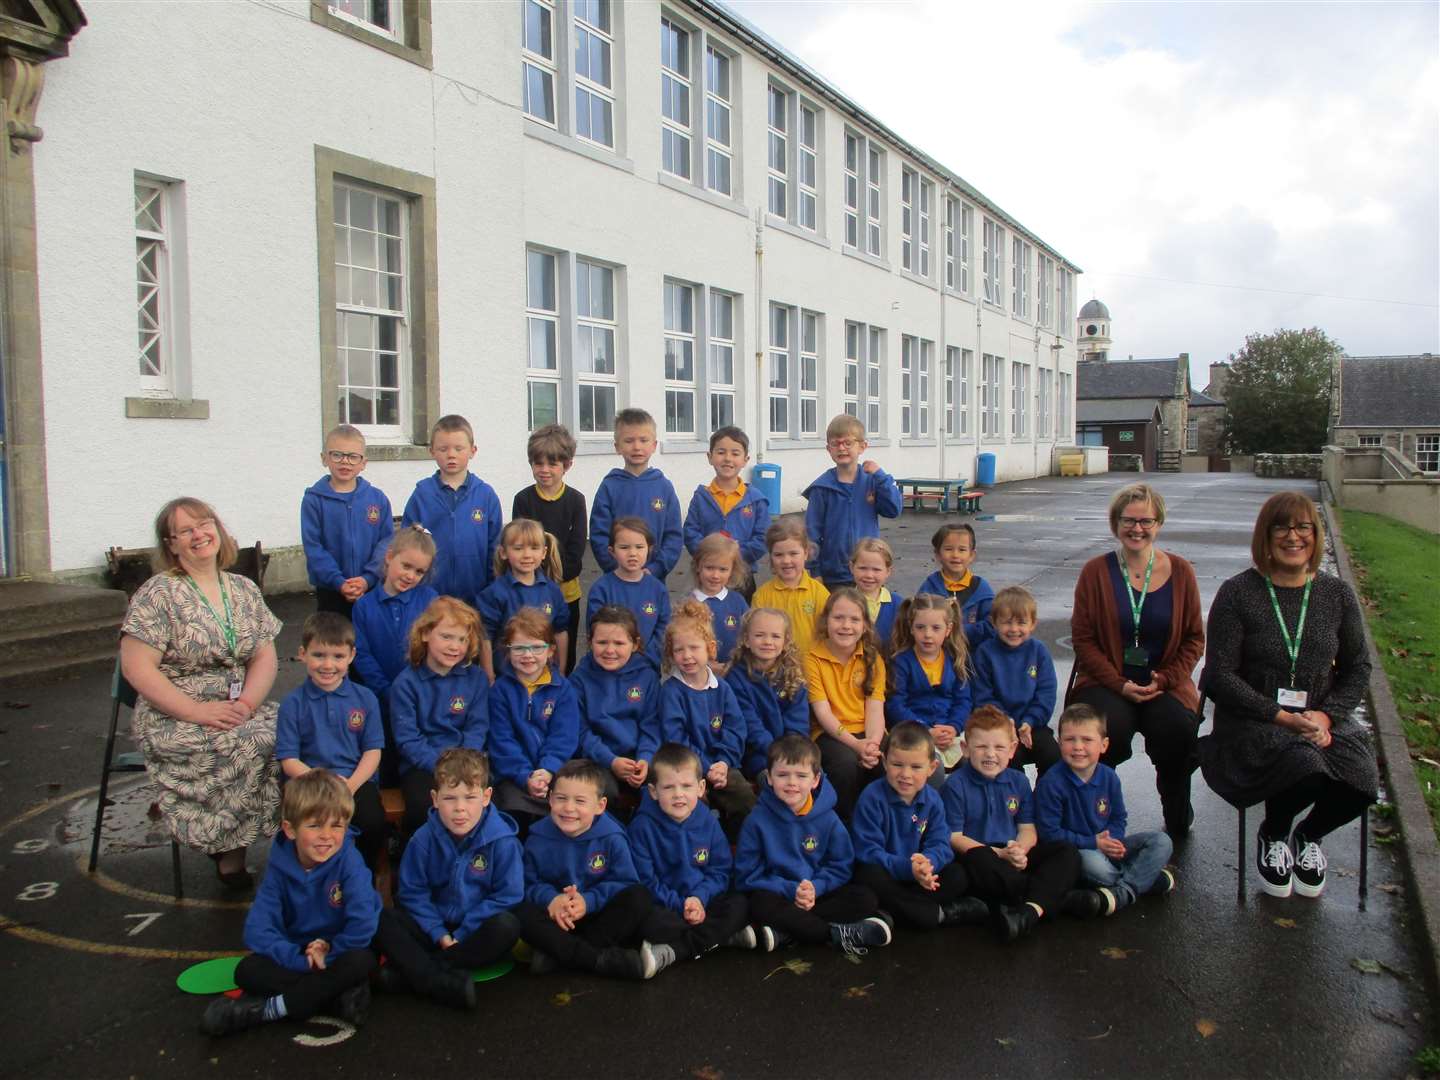 P1 at Miller Academy Primary with their teachers, Mrs Norma Mackie, Mrs Lynne Souter and pupil support assistant Mrs Lisa Critchley.